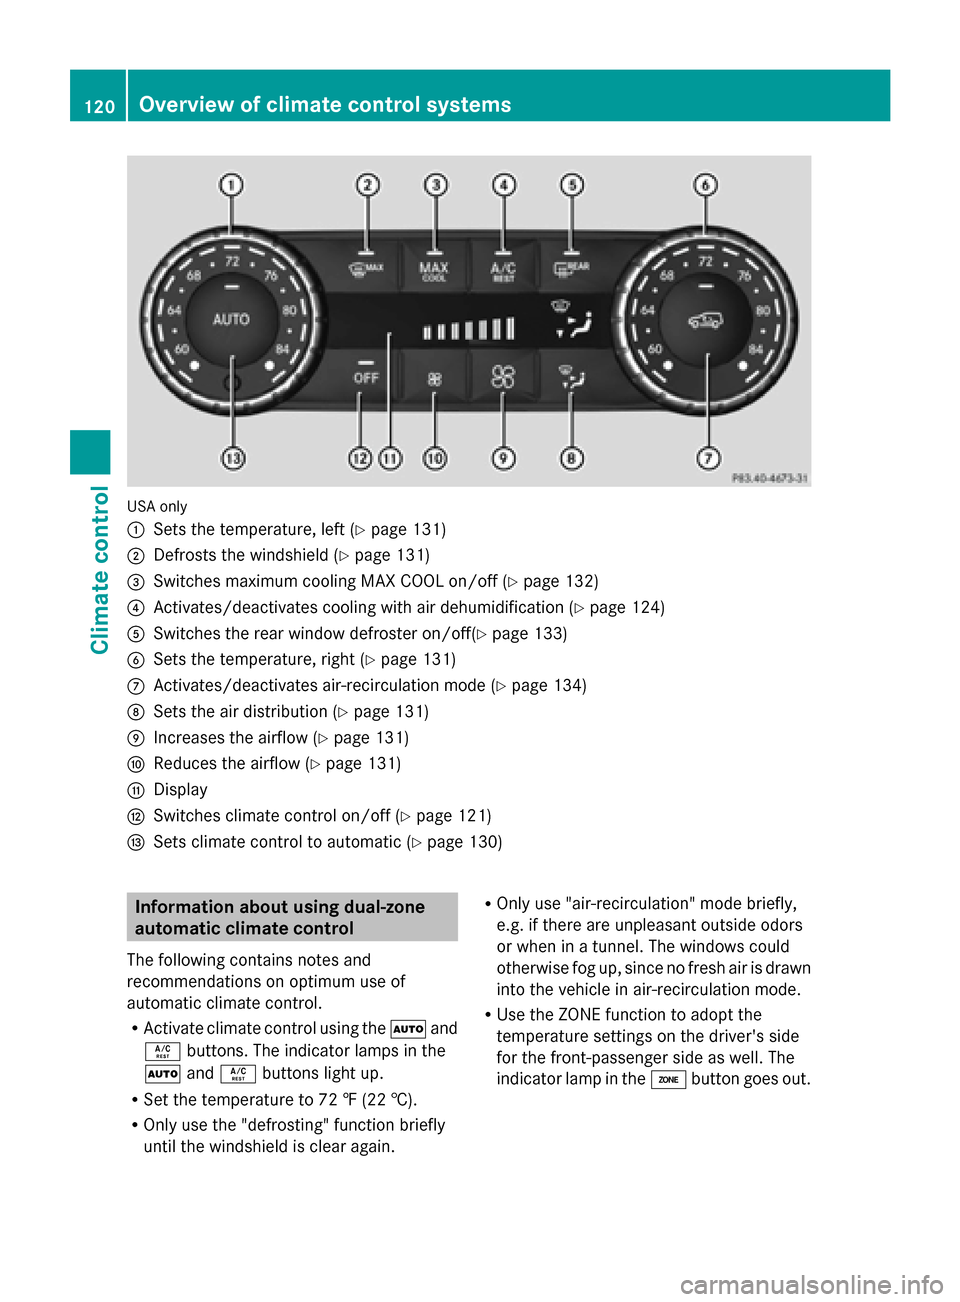 MERCEDES-BENZ G-Class 2014 W463 Owners Manual USA only
0043
Sets the temperature, left (Y page 131)
0044 Defrosts the windshield (Y page 131)
0087 Switches maximum cooling MAX COOL on/off (Y page 132)
0085 Activates/deactivates cooling with air d